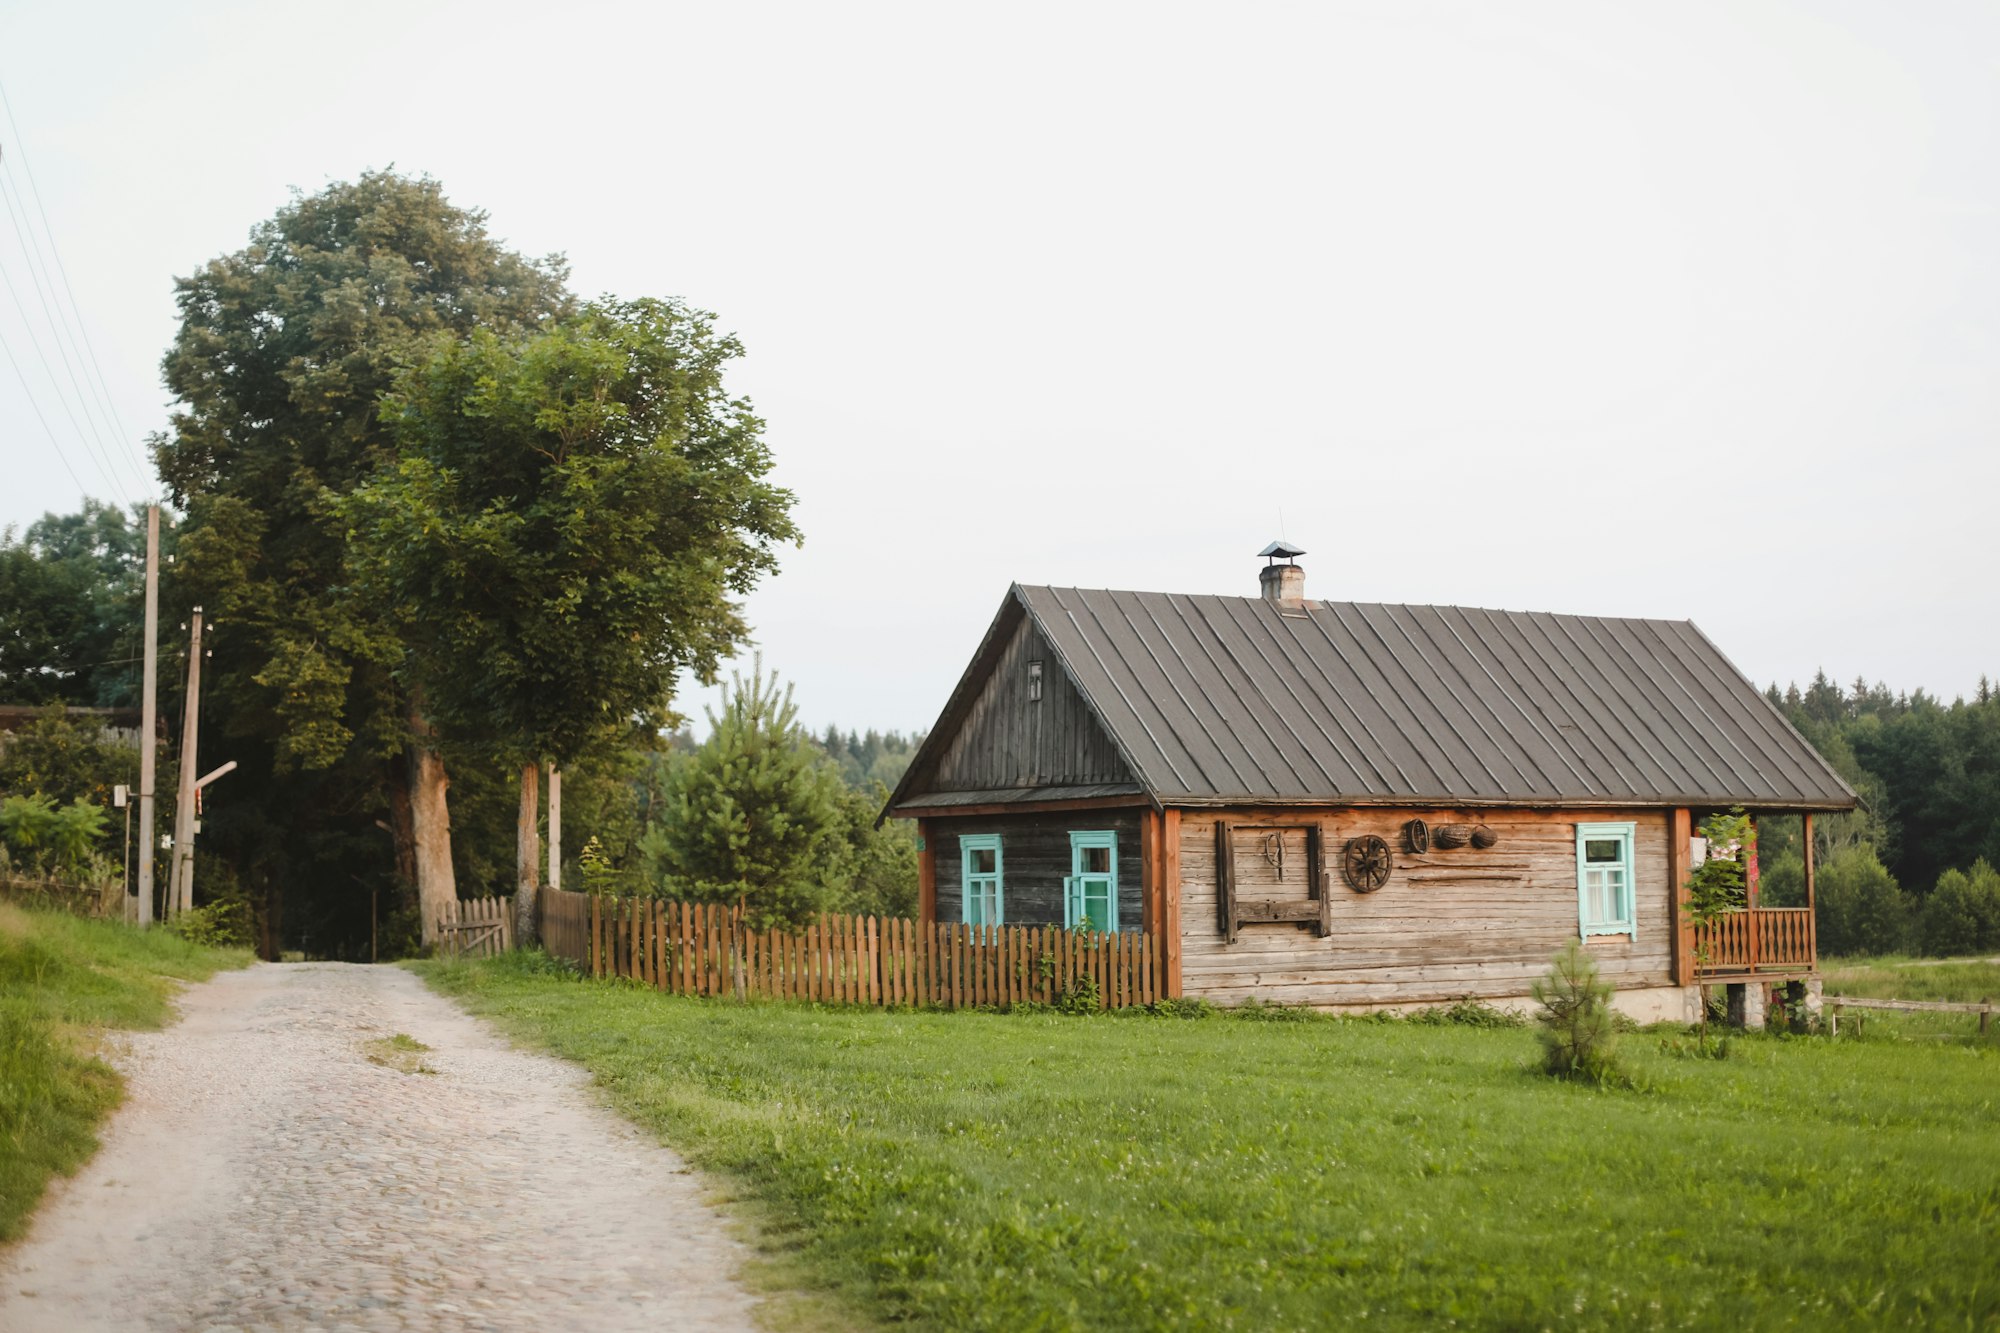 summer picturesque rural landscape with a wooden country farmhouse